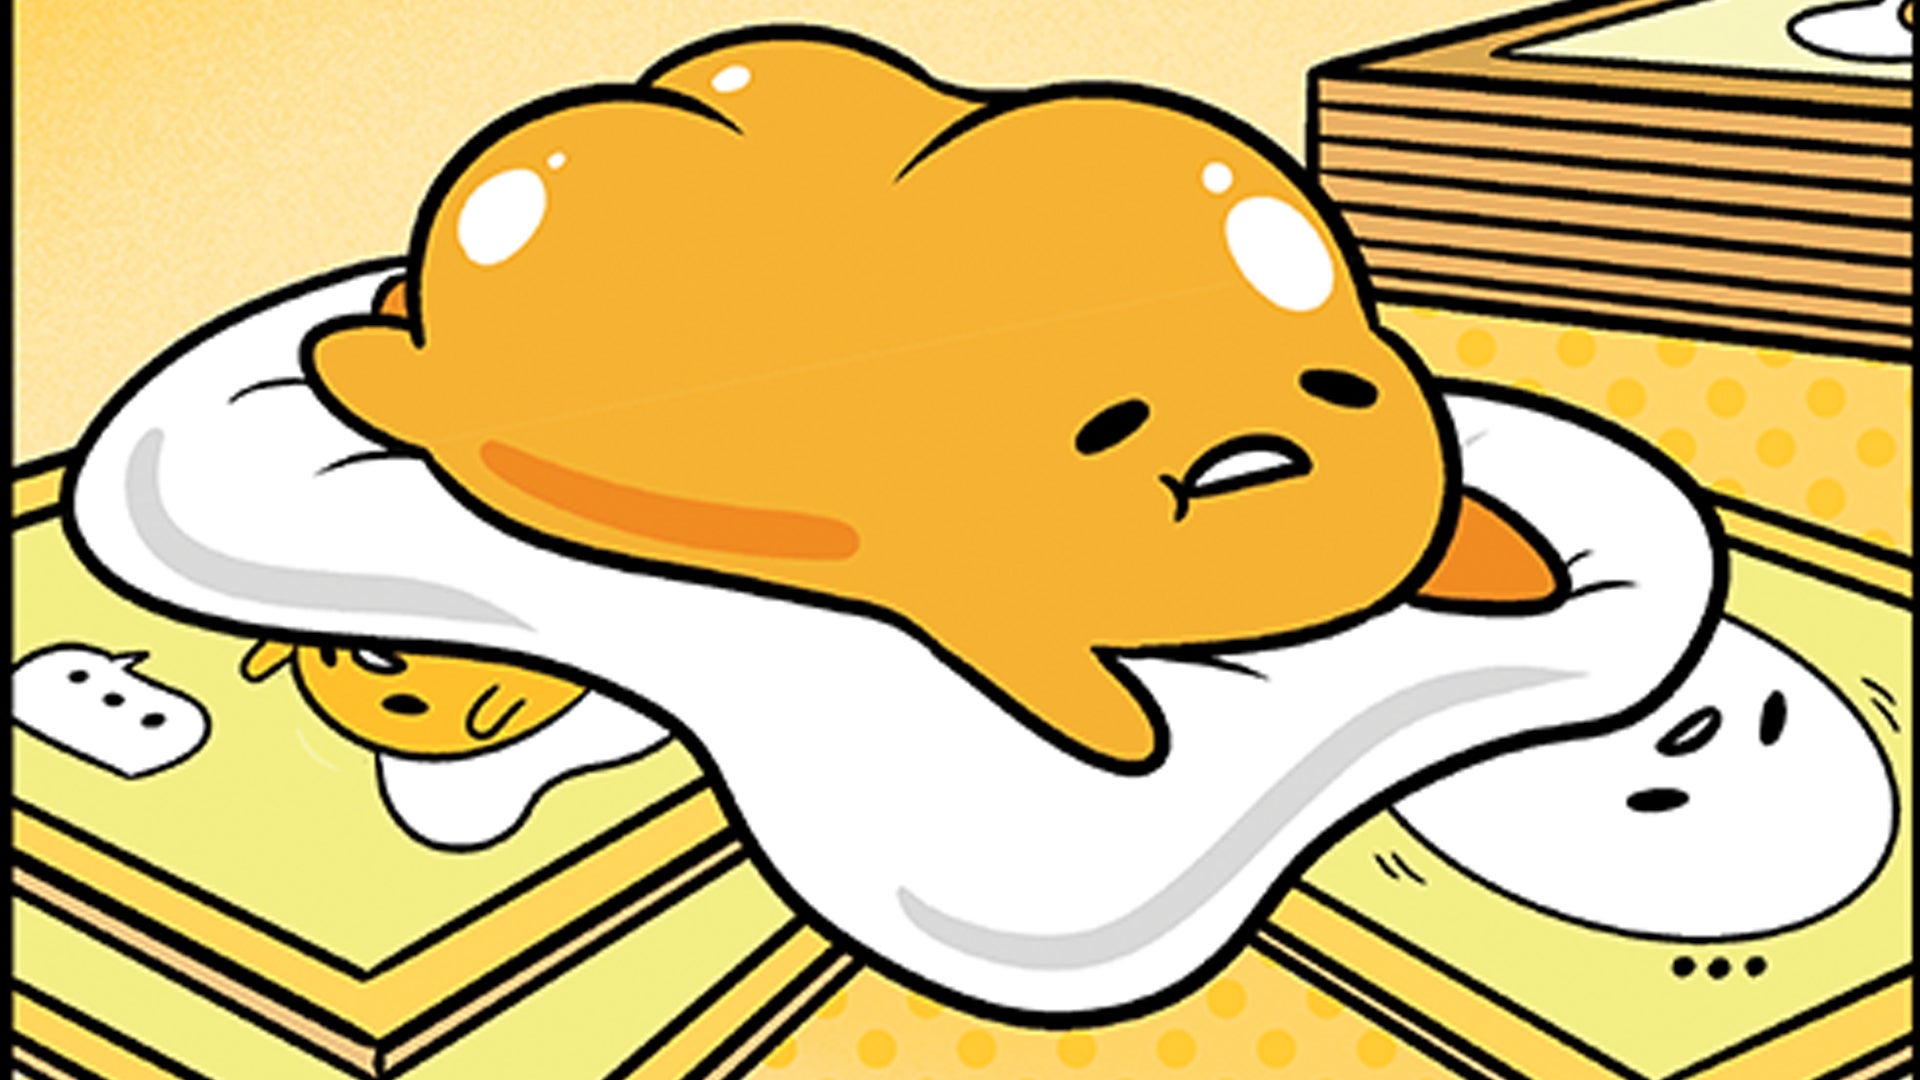 Gudetama card game, based on the lethargic Japanese cartoon, invites you to  be as lazy as you like | Dicebreaker